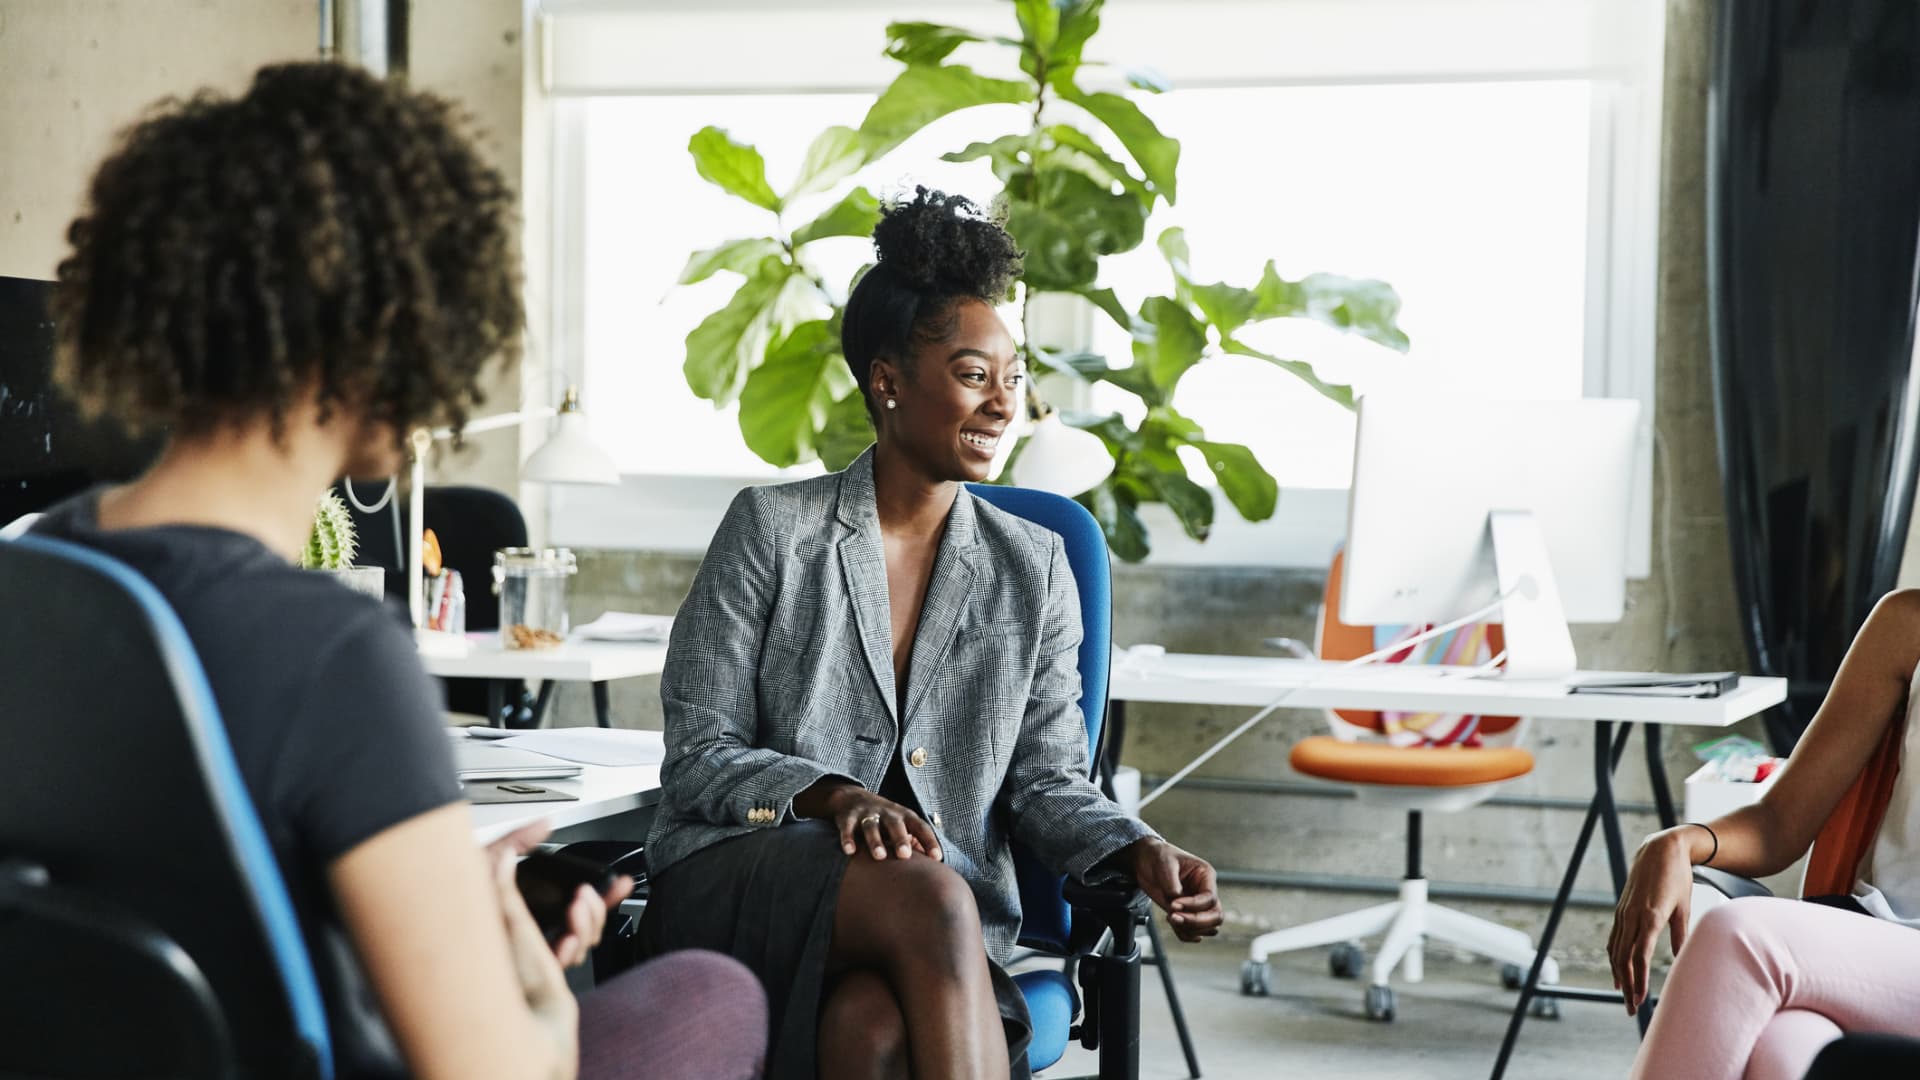 Black women are the fastest-growing group of entrepreneurs